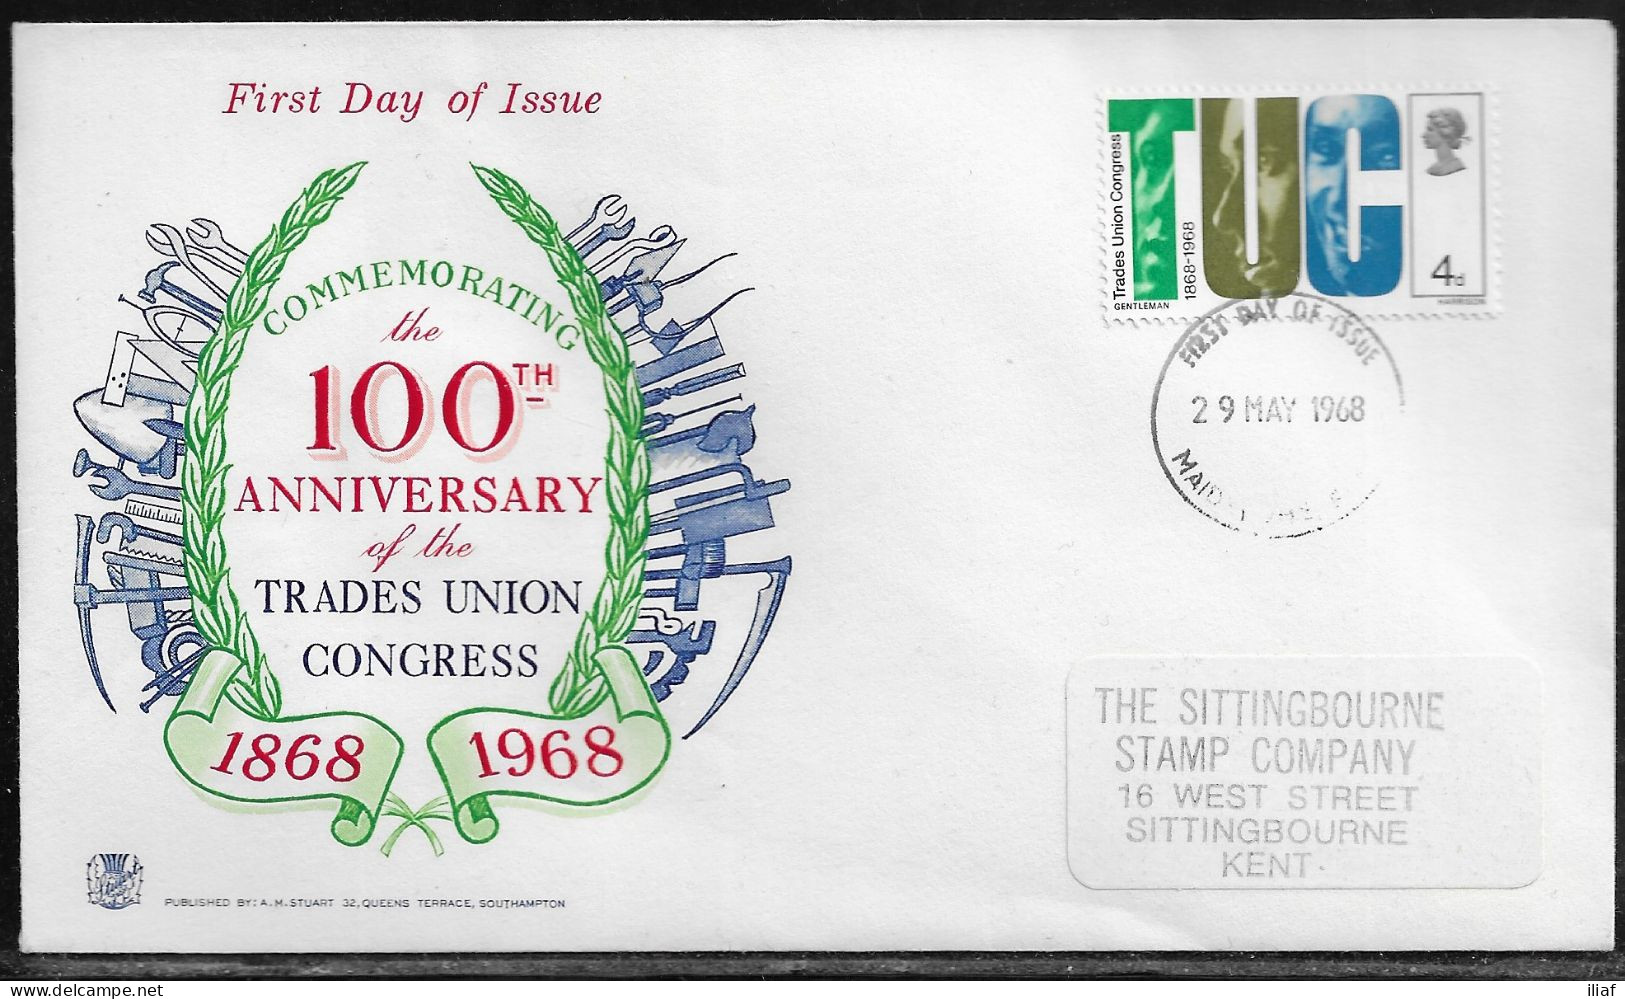 United Kingdom Of Great Britain.  FDC Sc. 564.  100th Anniversary Of The "TUC" And Trade Unionists.  FDC Cancellation - 1952-1971 Pre-Decimale Uitgaves